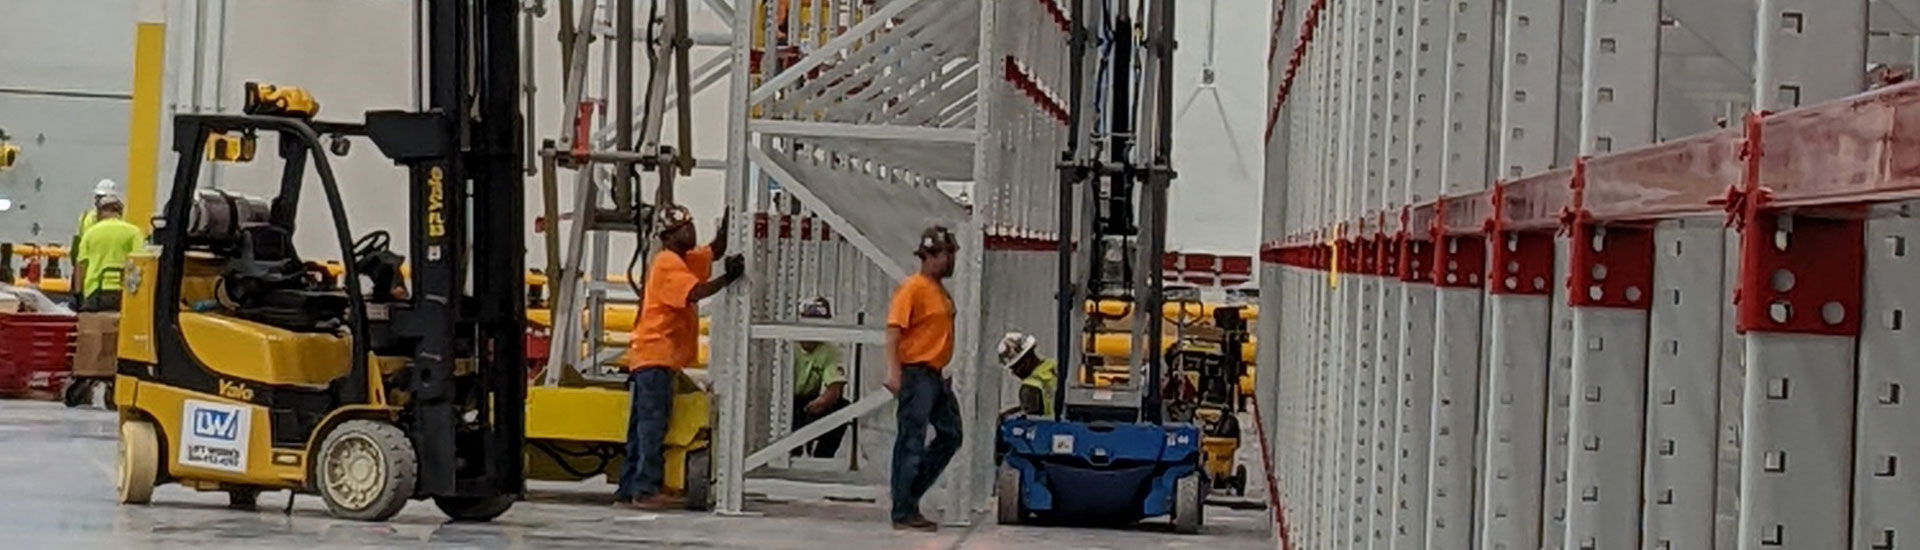 Carpenters working around scaffolding within a large warehouse